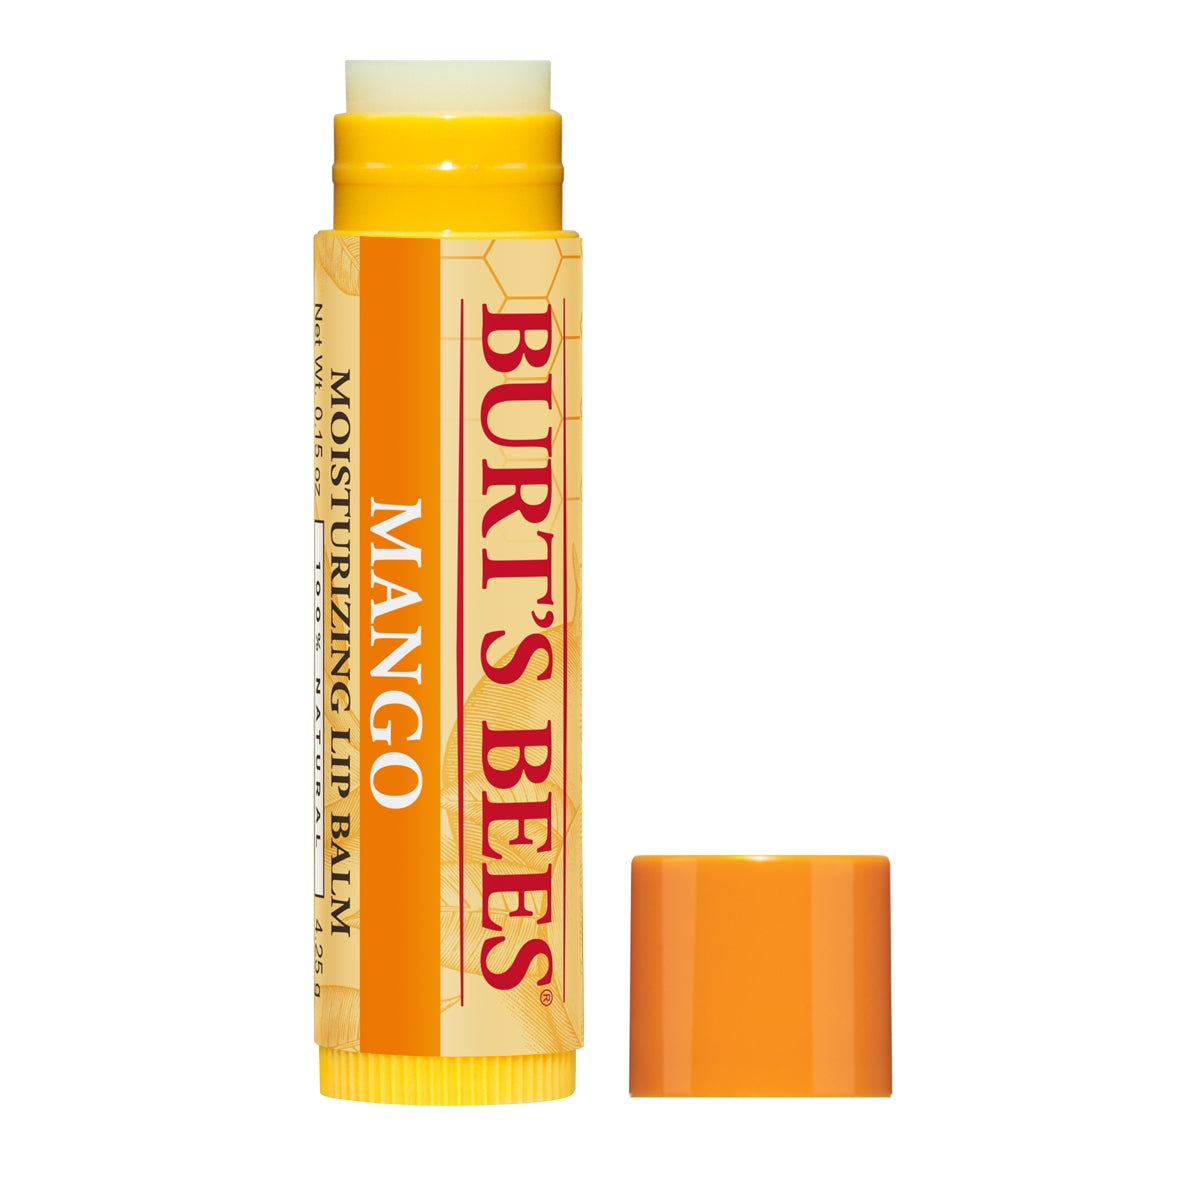 Beeswax Lip Balm - The Frosted Flamingo